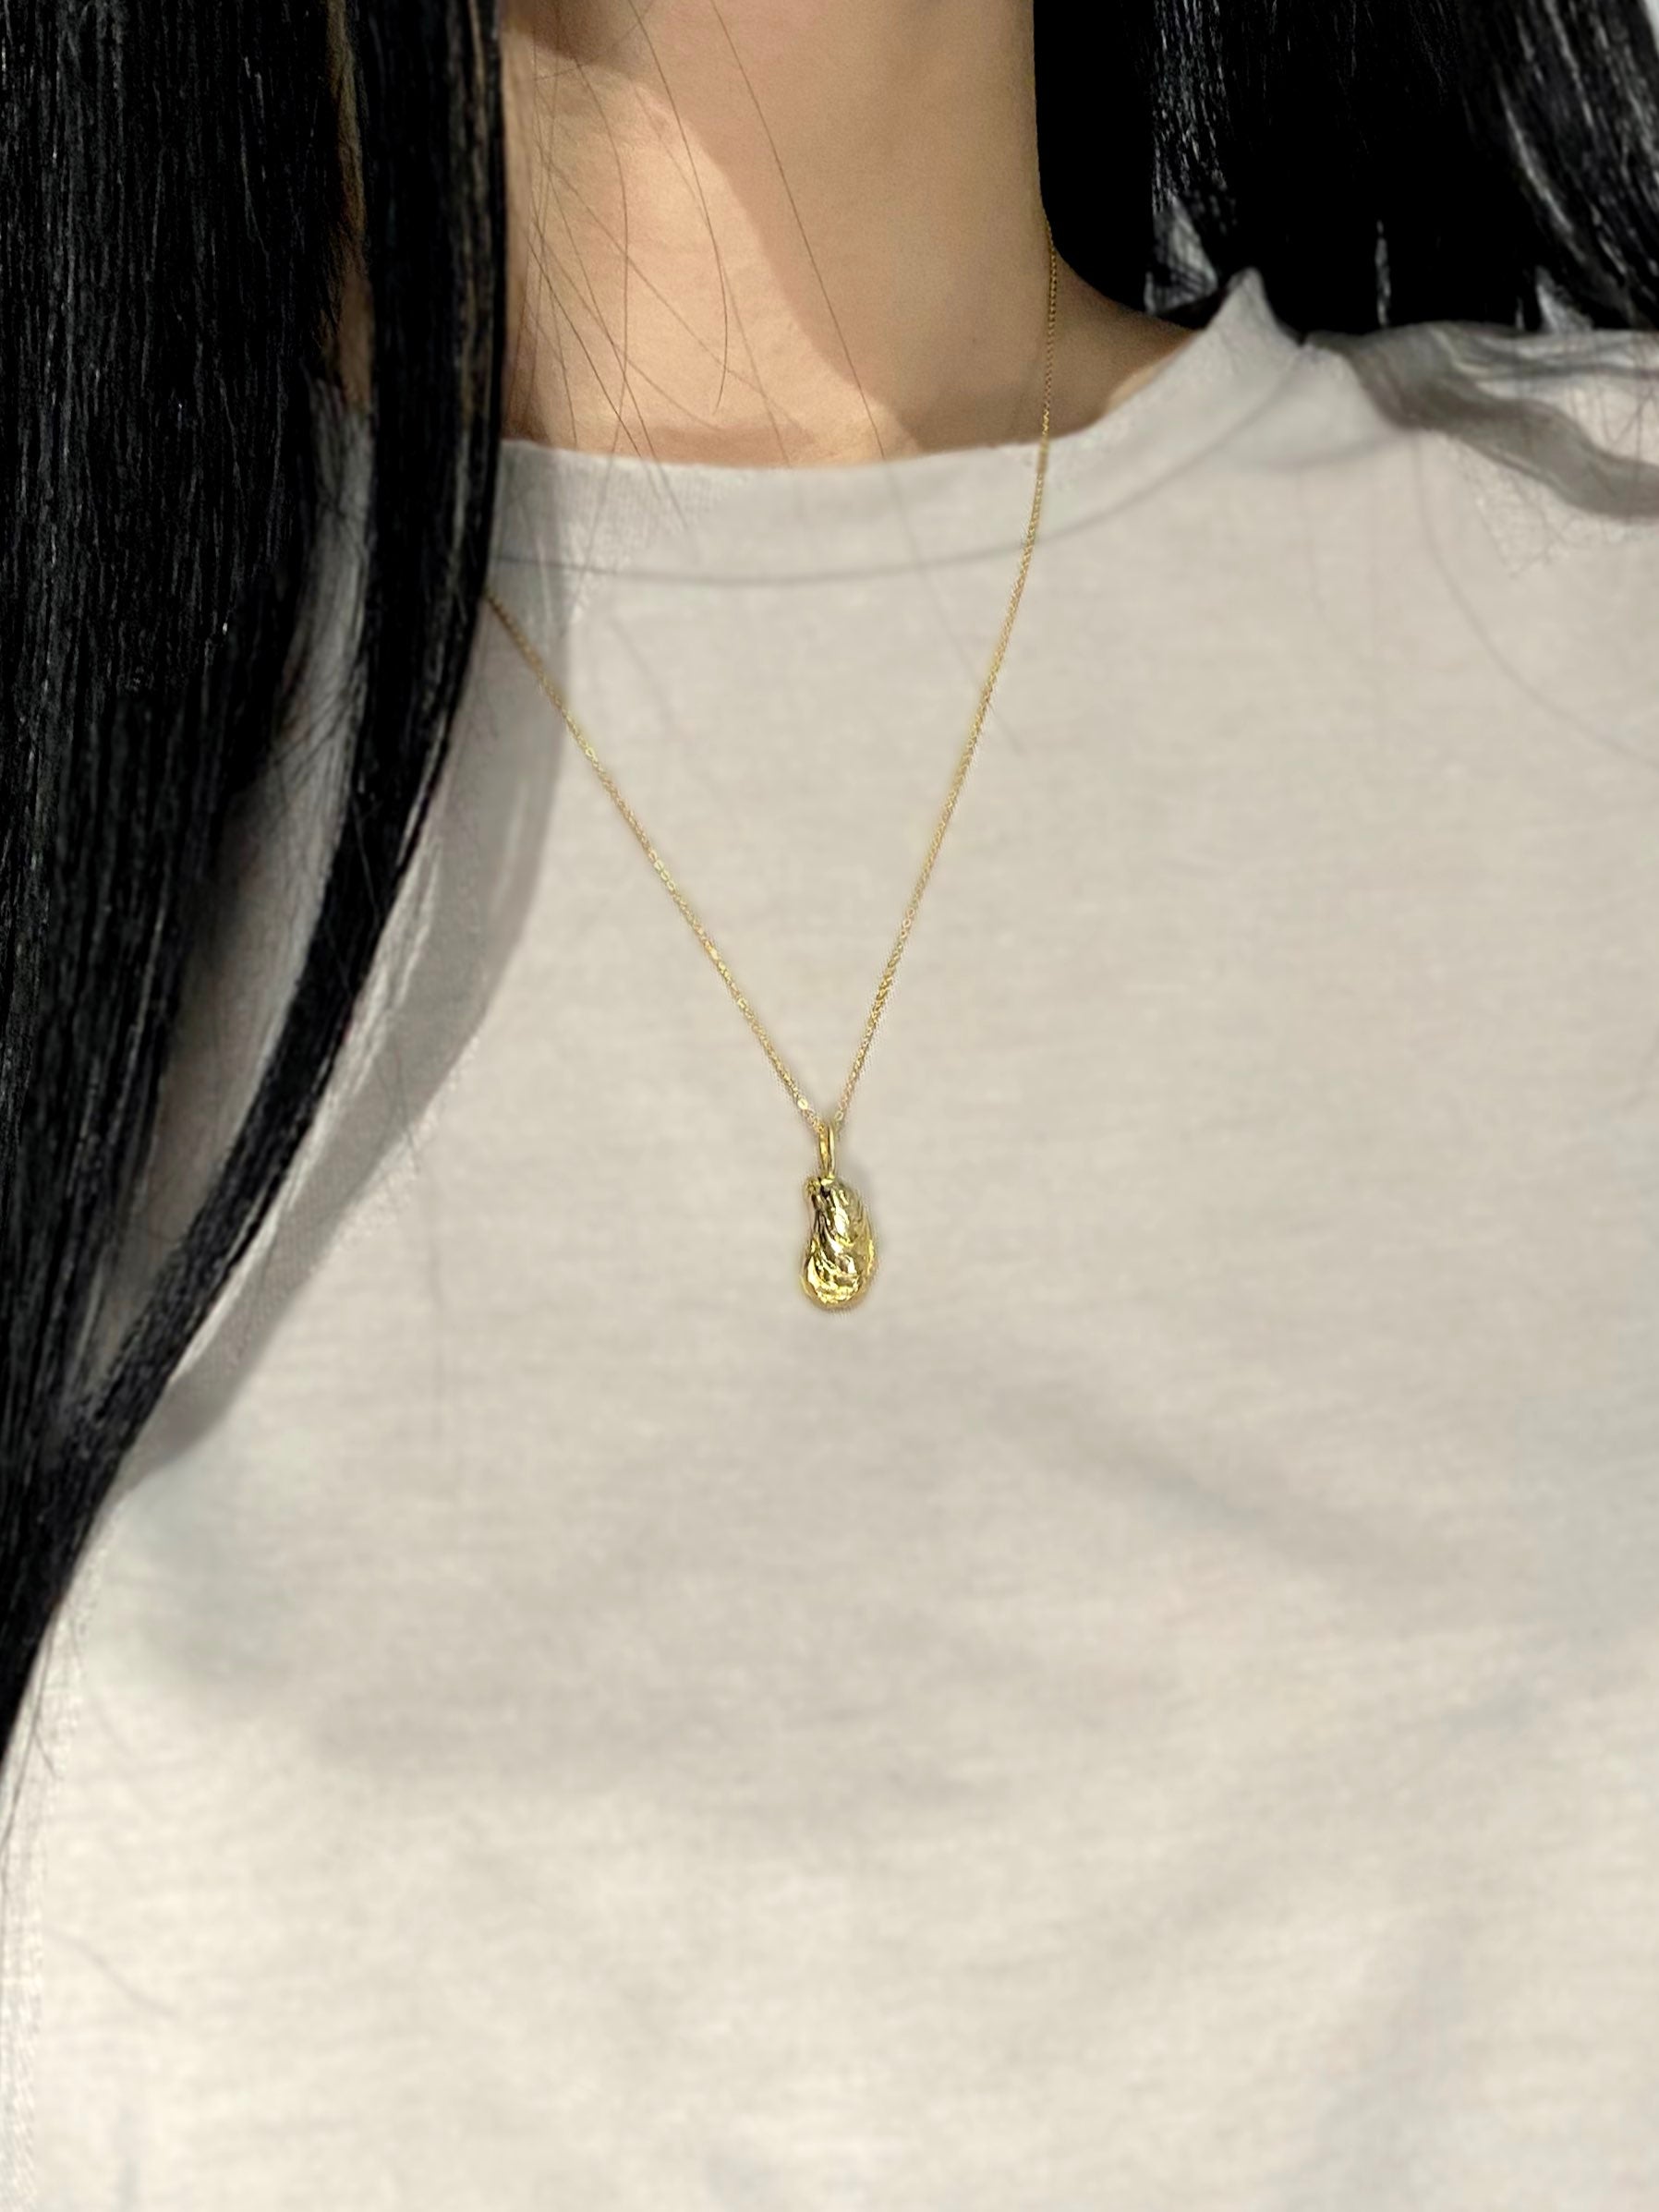 Gold oyster charm necklace on model with grey shirt